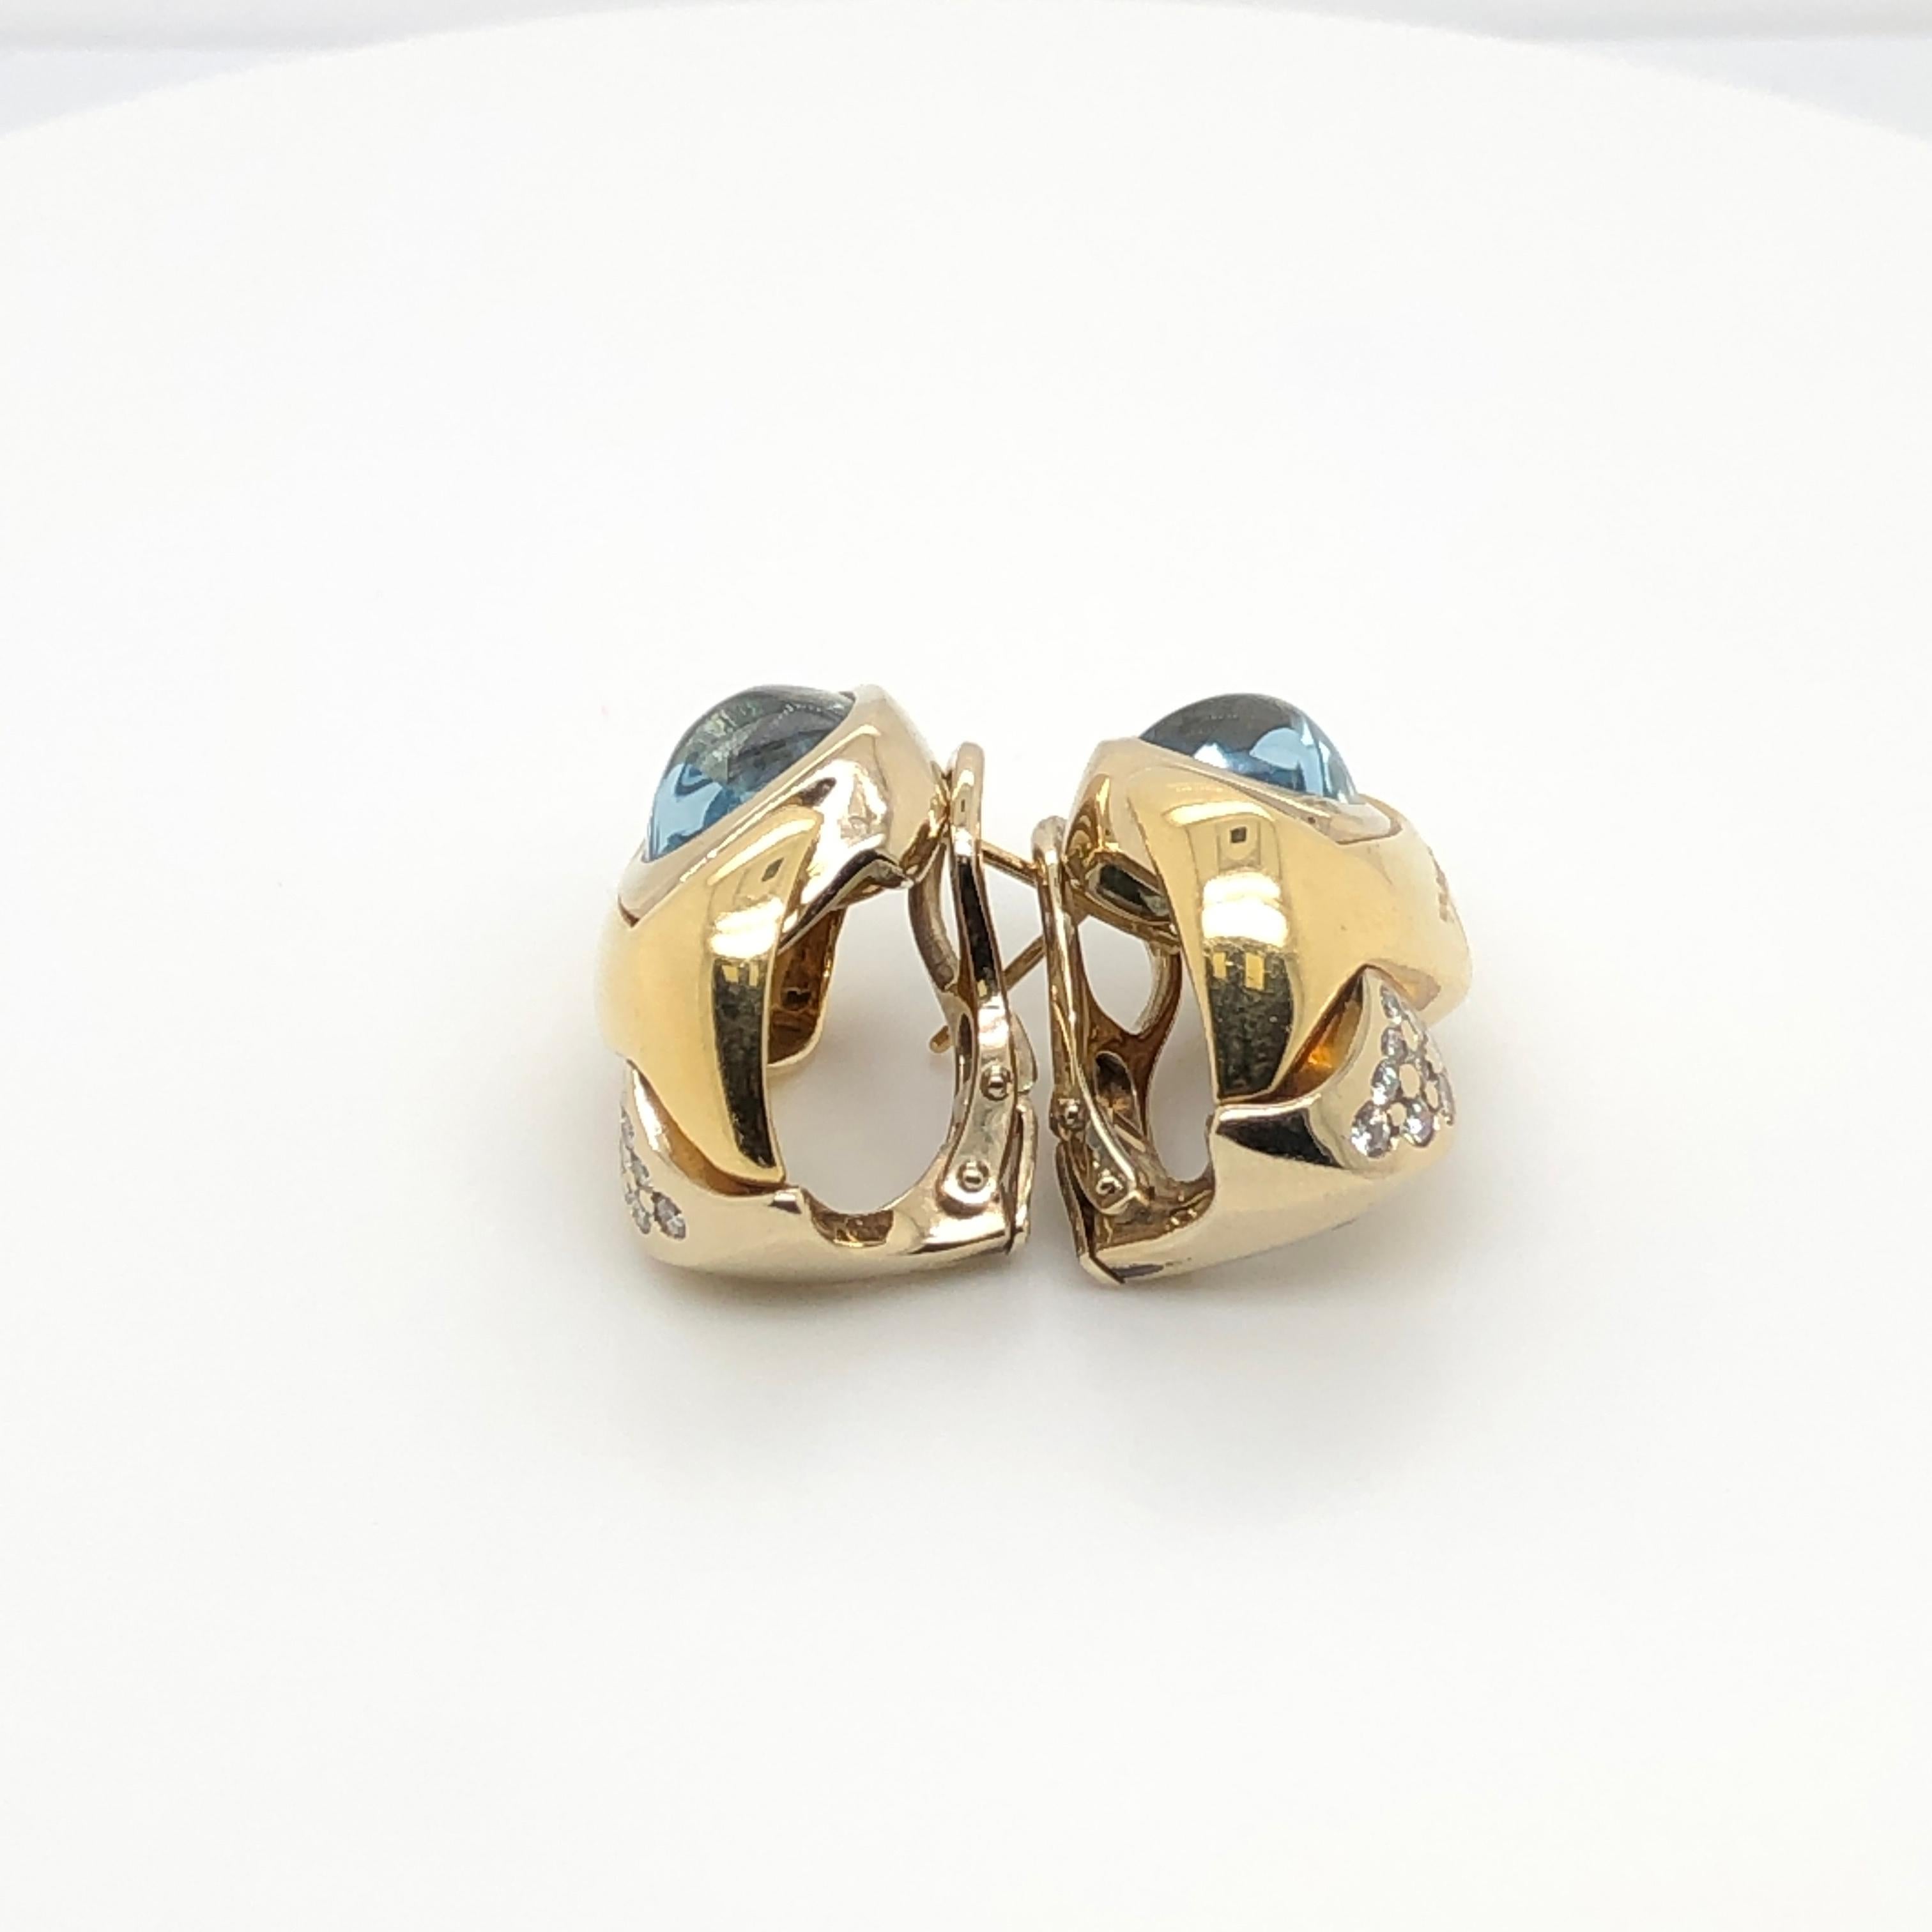 Le Vian 4 Carat Aquamarine Two-Tone Gold Earrings In New Condition For Sale In Great Neck, NY